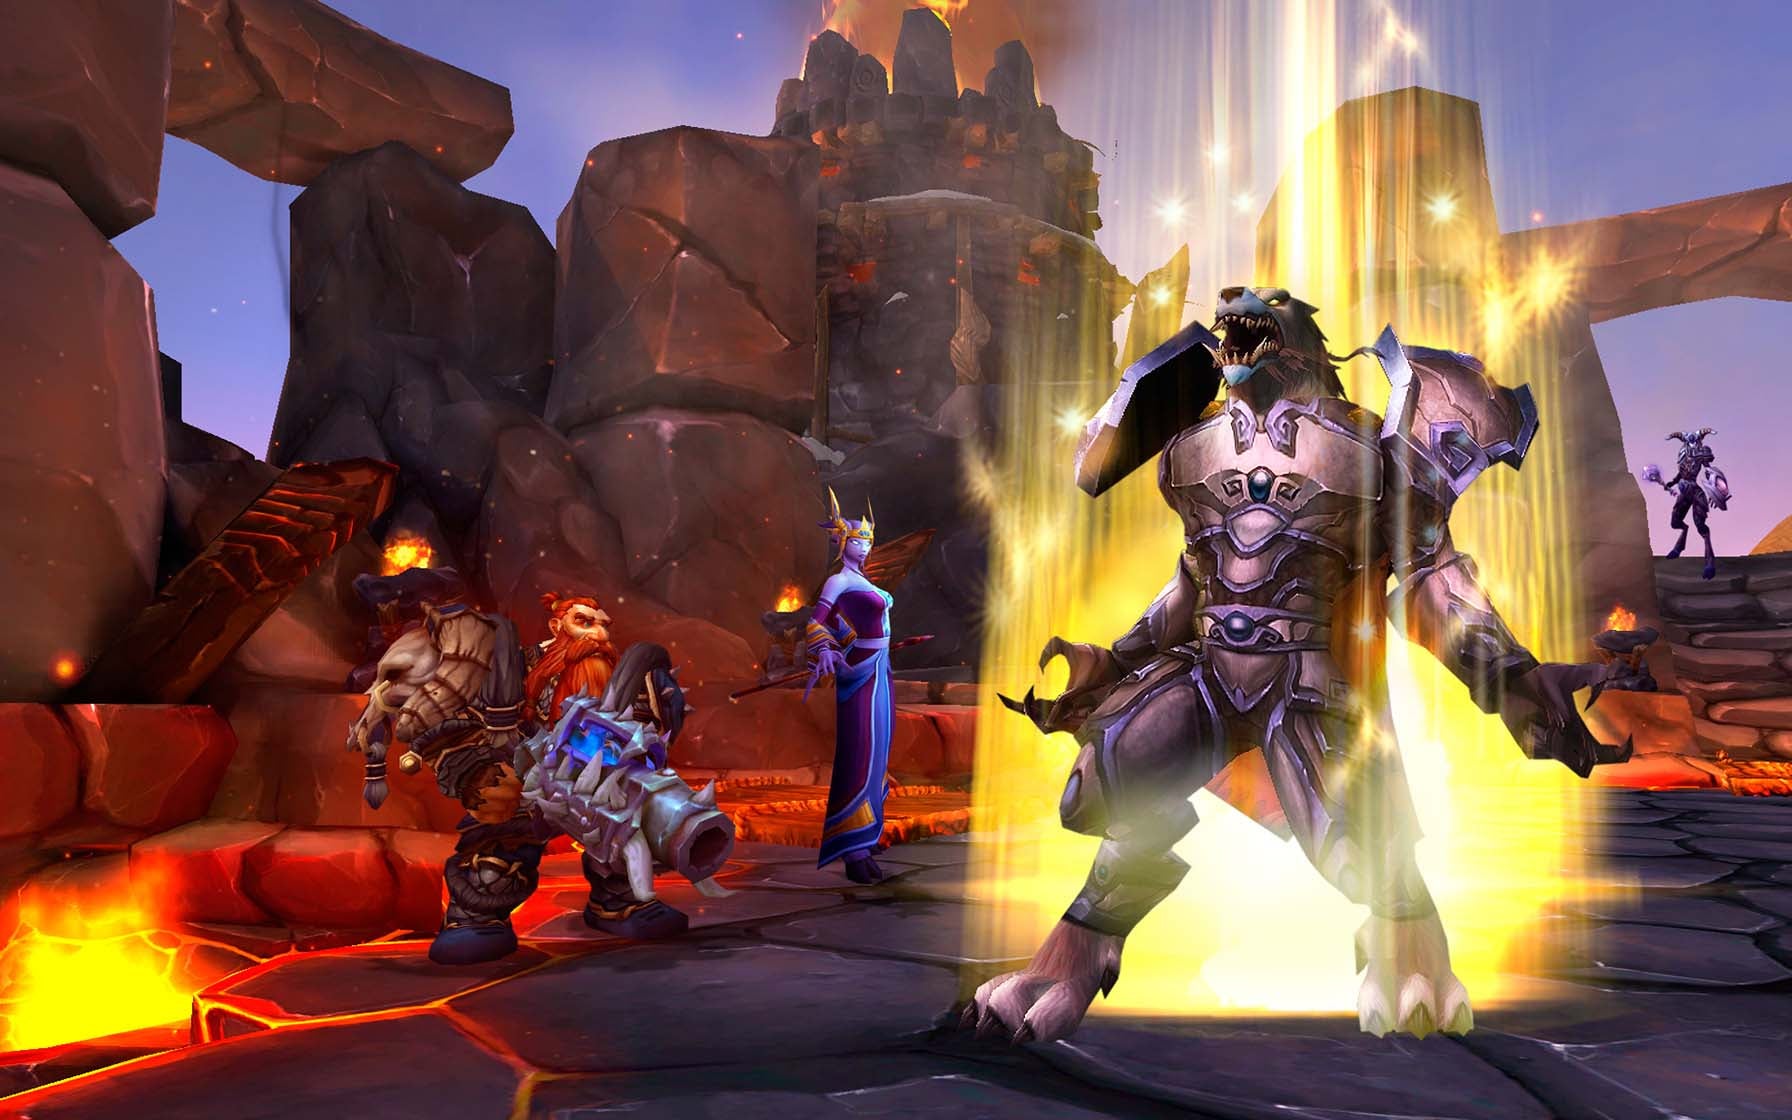 World Of Warcraft Will Reduce Everyone’s Level To Avoid A ‘Grind’